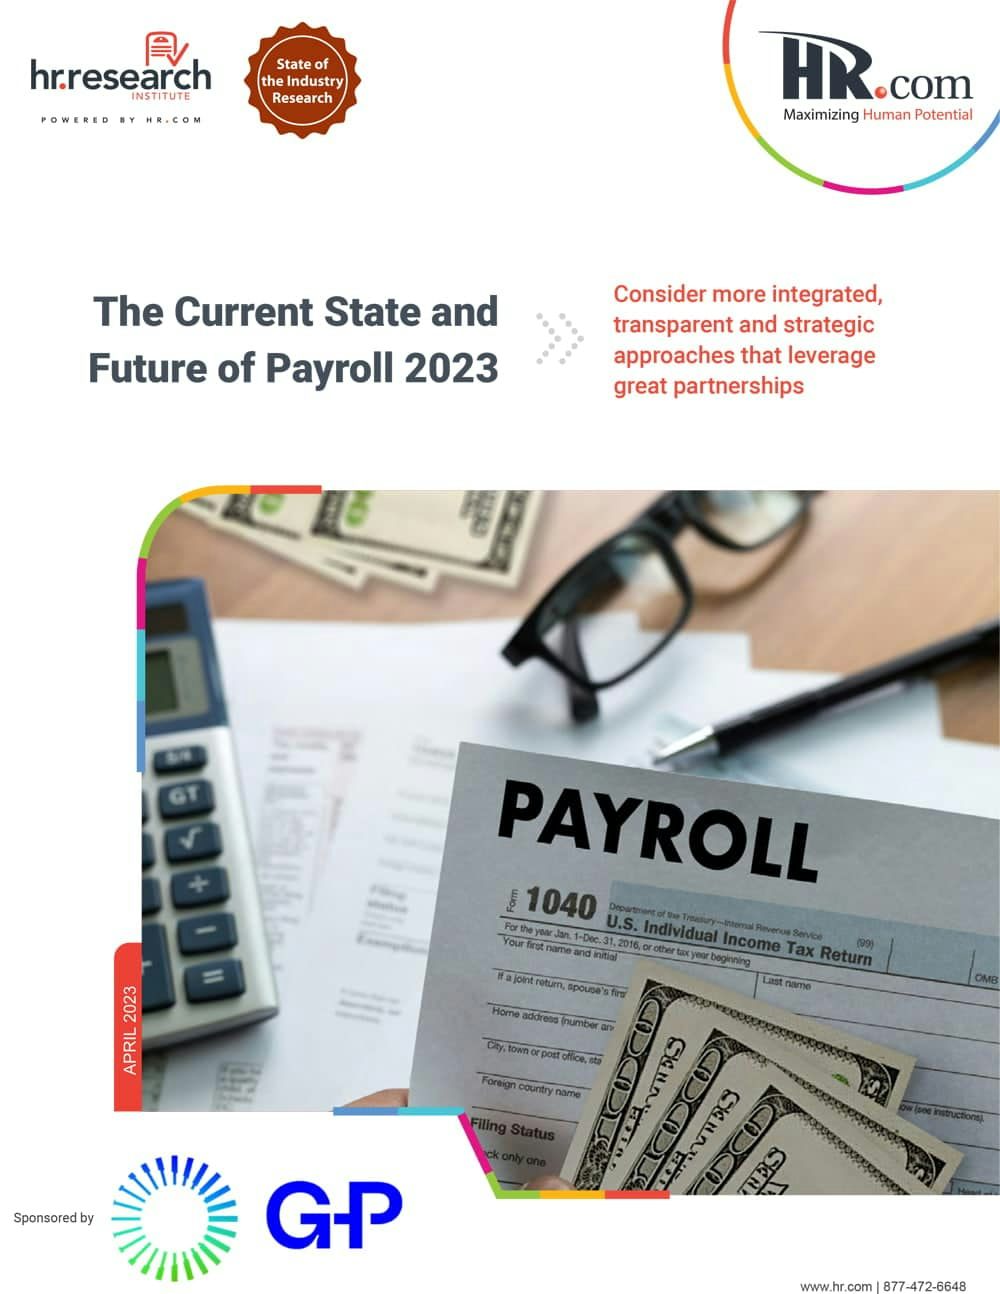 future-of-payroll-research-report-cover.jpg